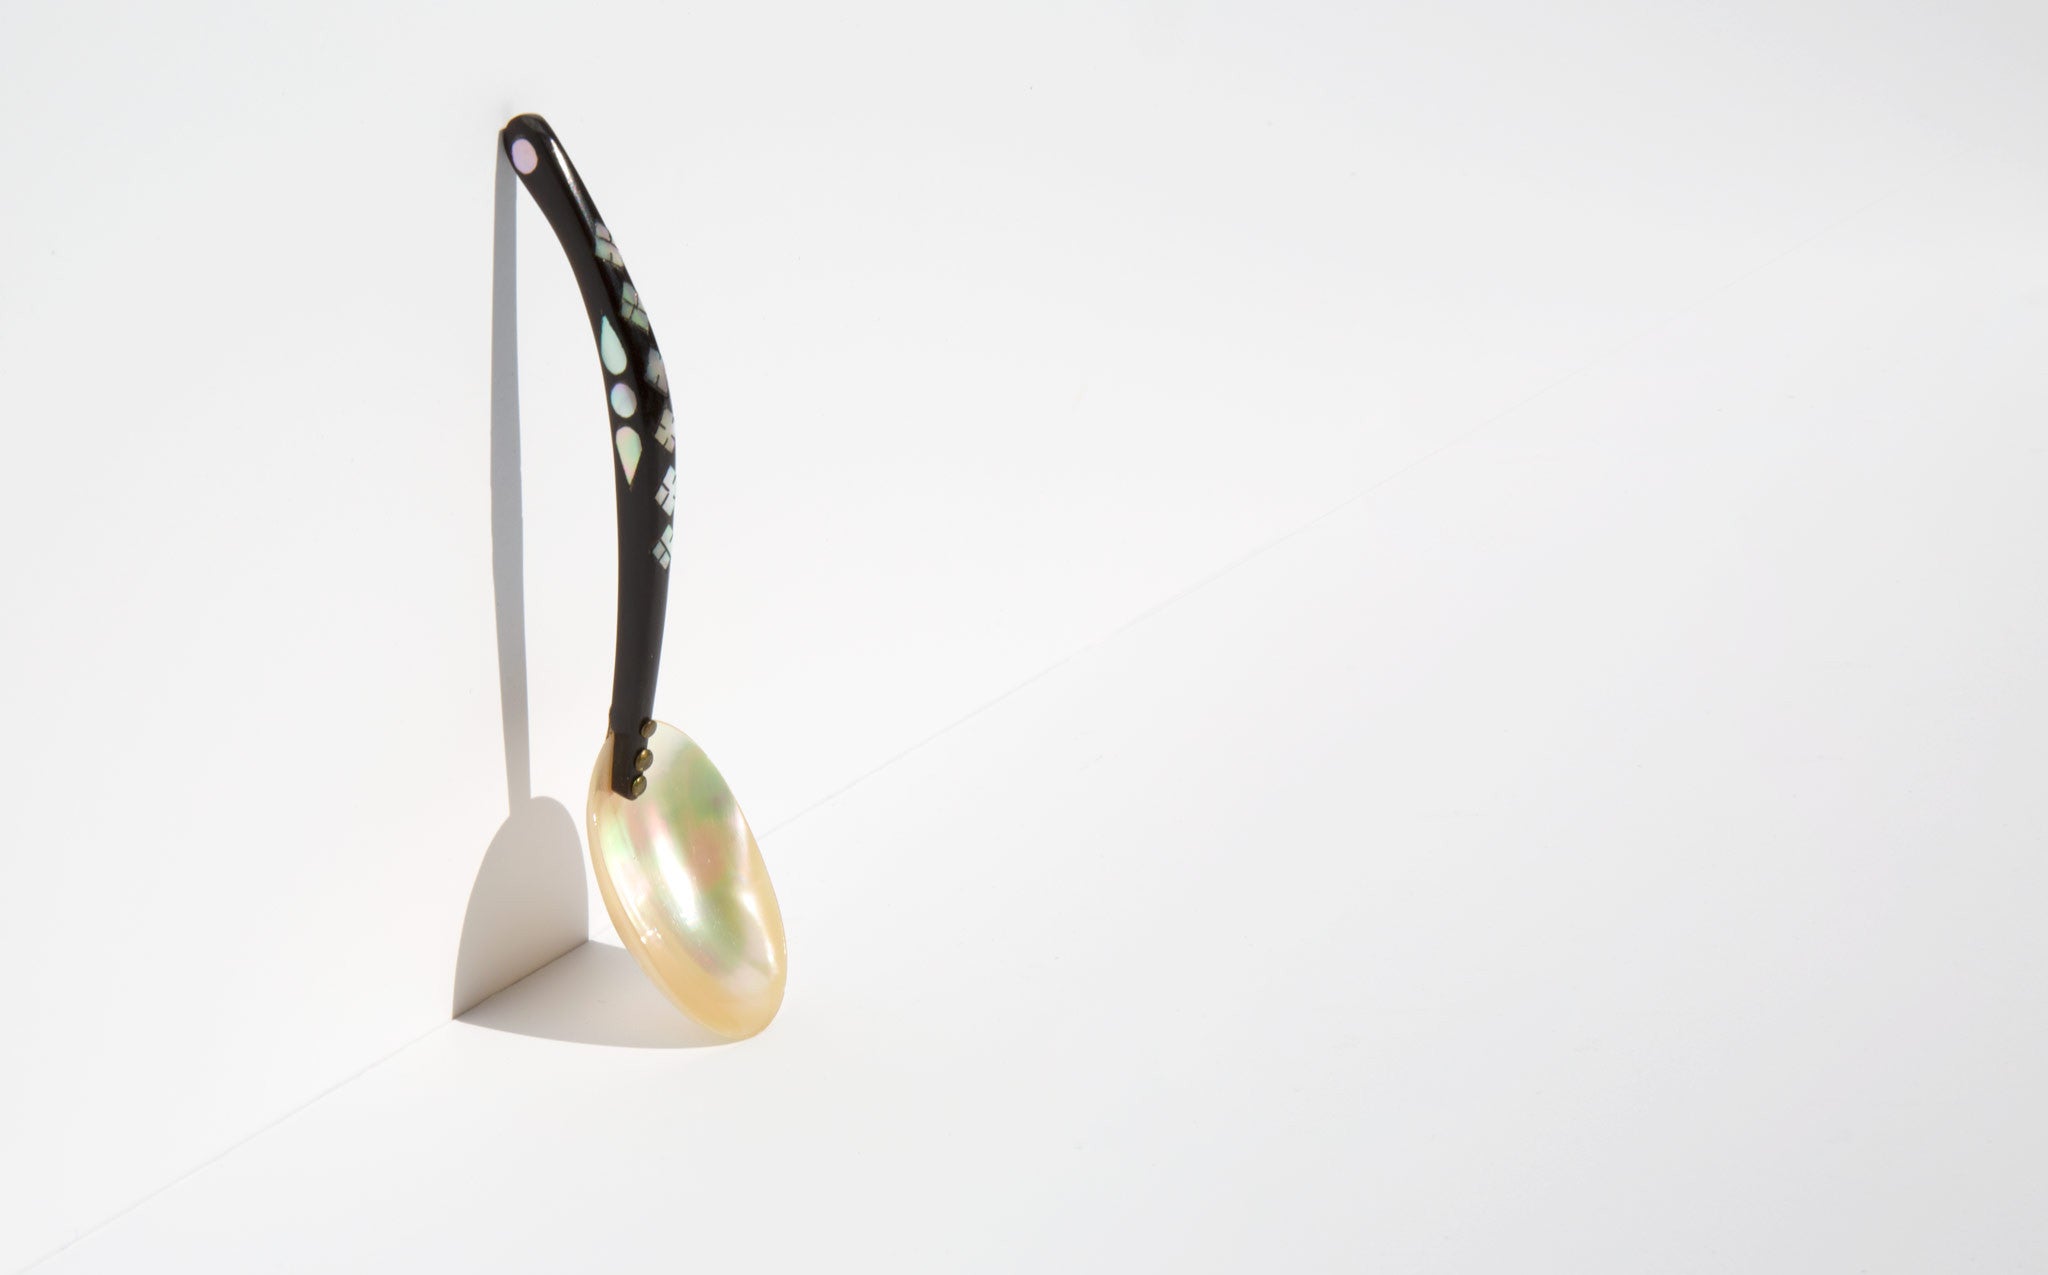 Ebony and Mother of Pearl Caviar Spoon